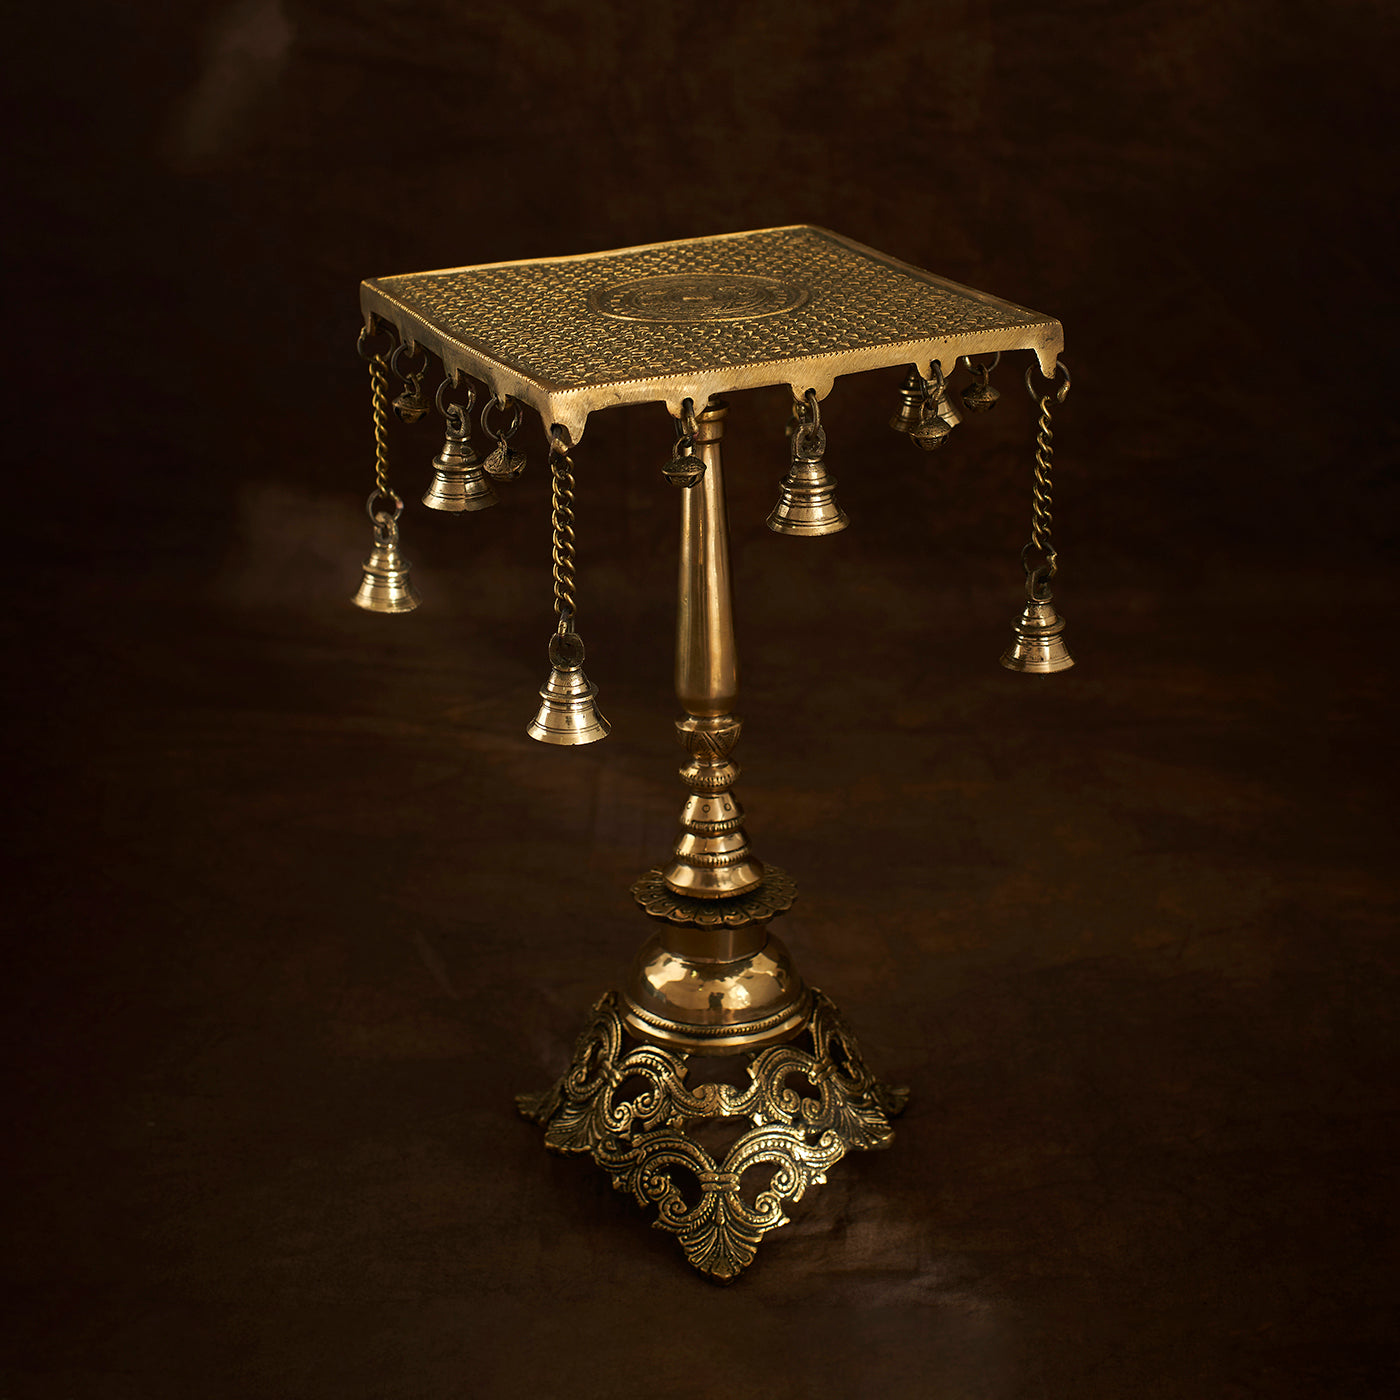 Authentic Brass Stool With Hanging Bells